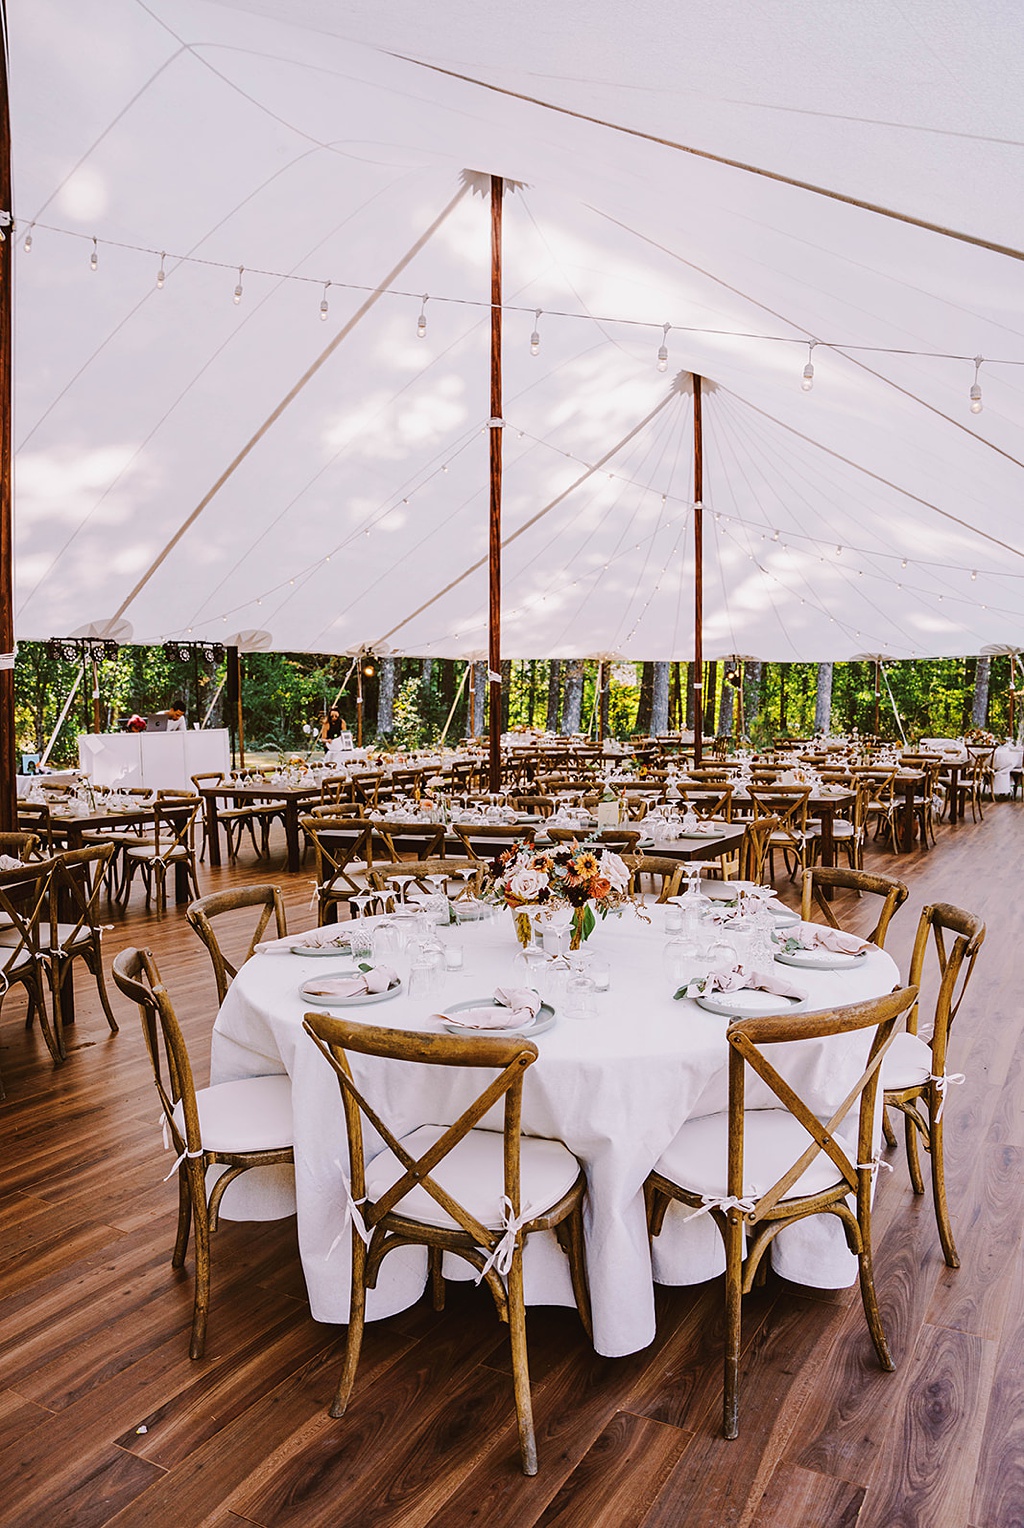 A tented reception at this summer wedding